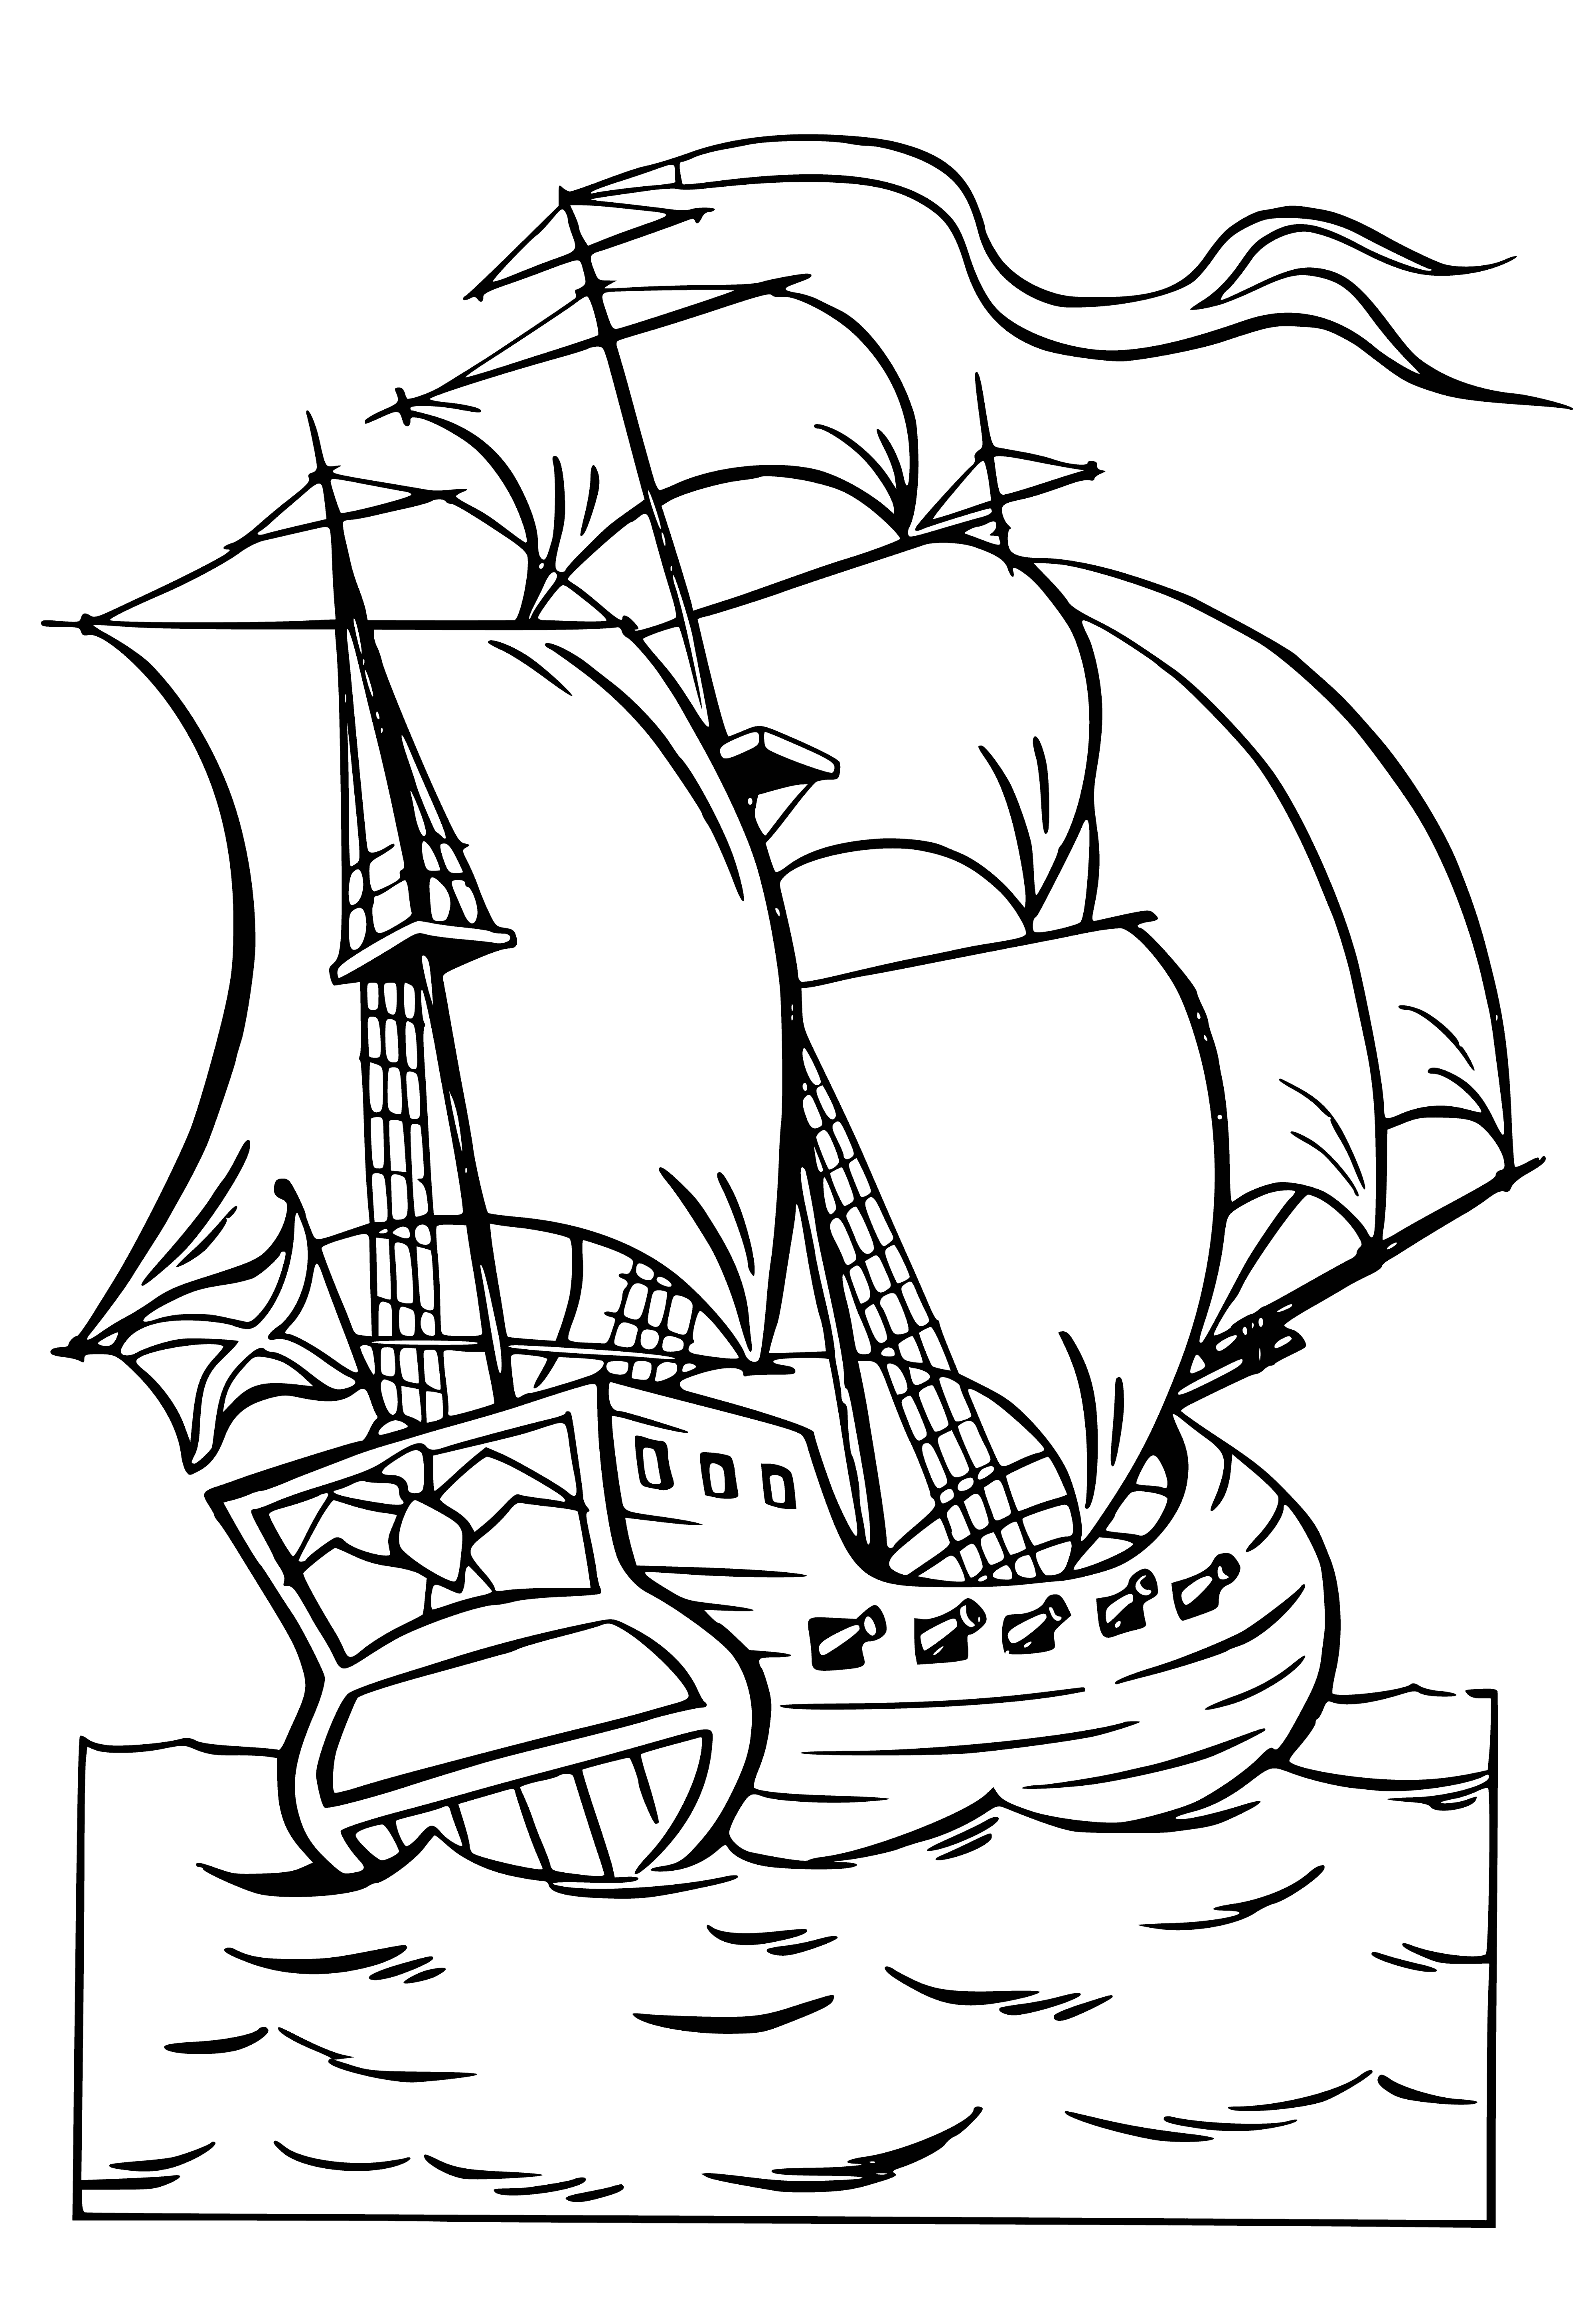 coloring page: A tall ship sails in clear skies on calm waters near the shore, with other ships and birds in the background.